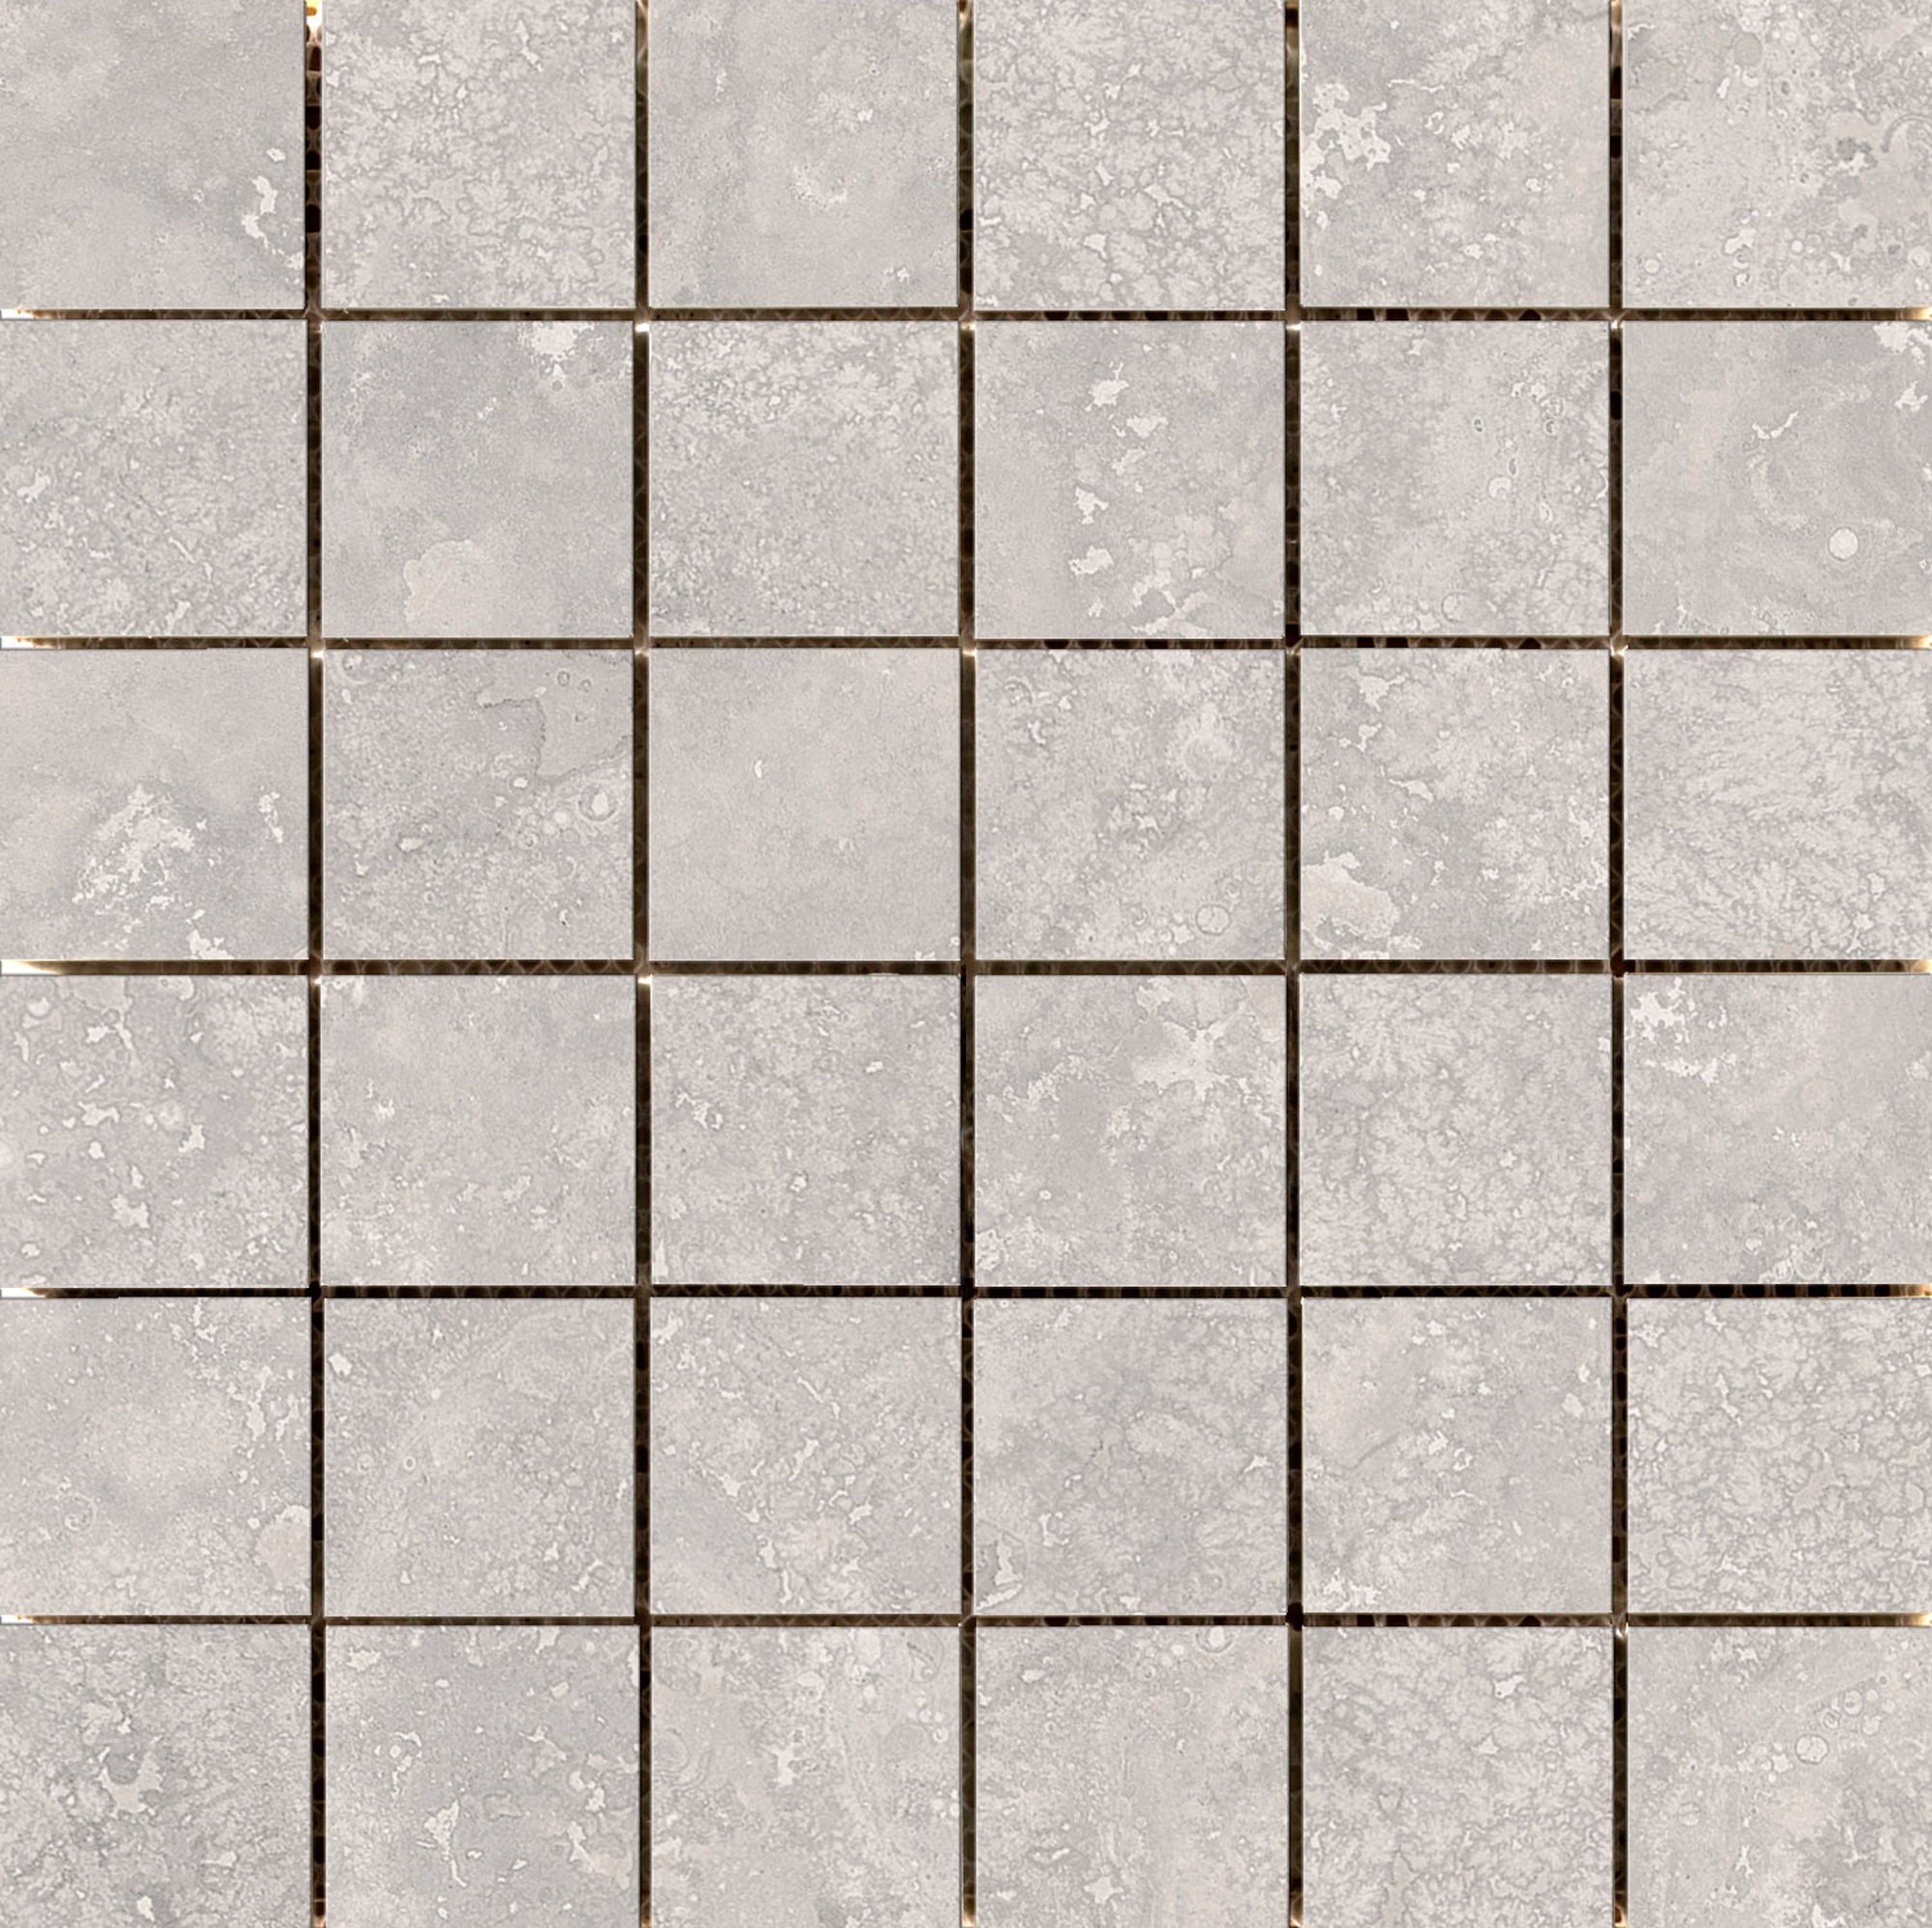 Emser COSTA GRAY mosaic 2X2/12X12 ceramic tile is an Emser tile Product. 